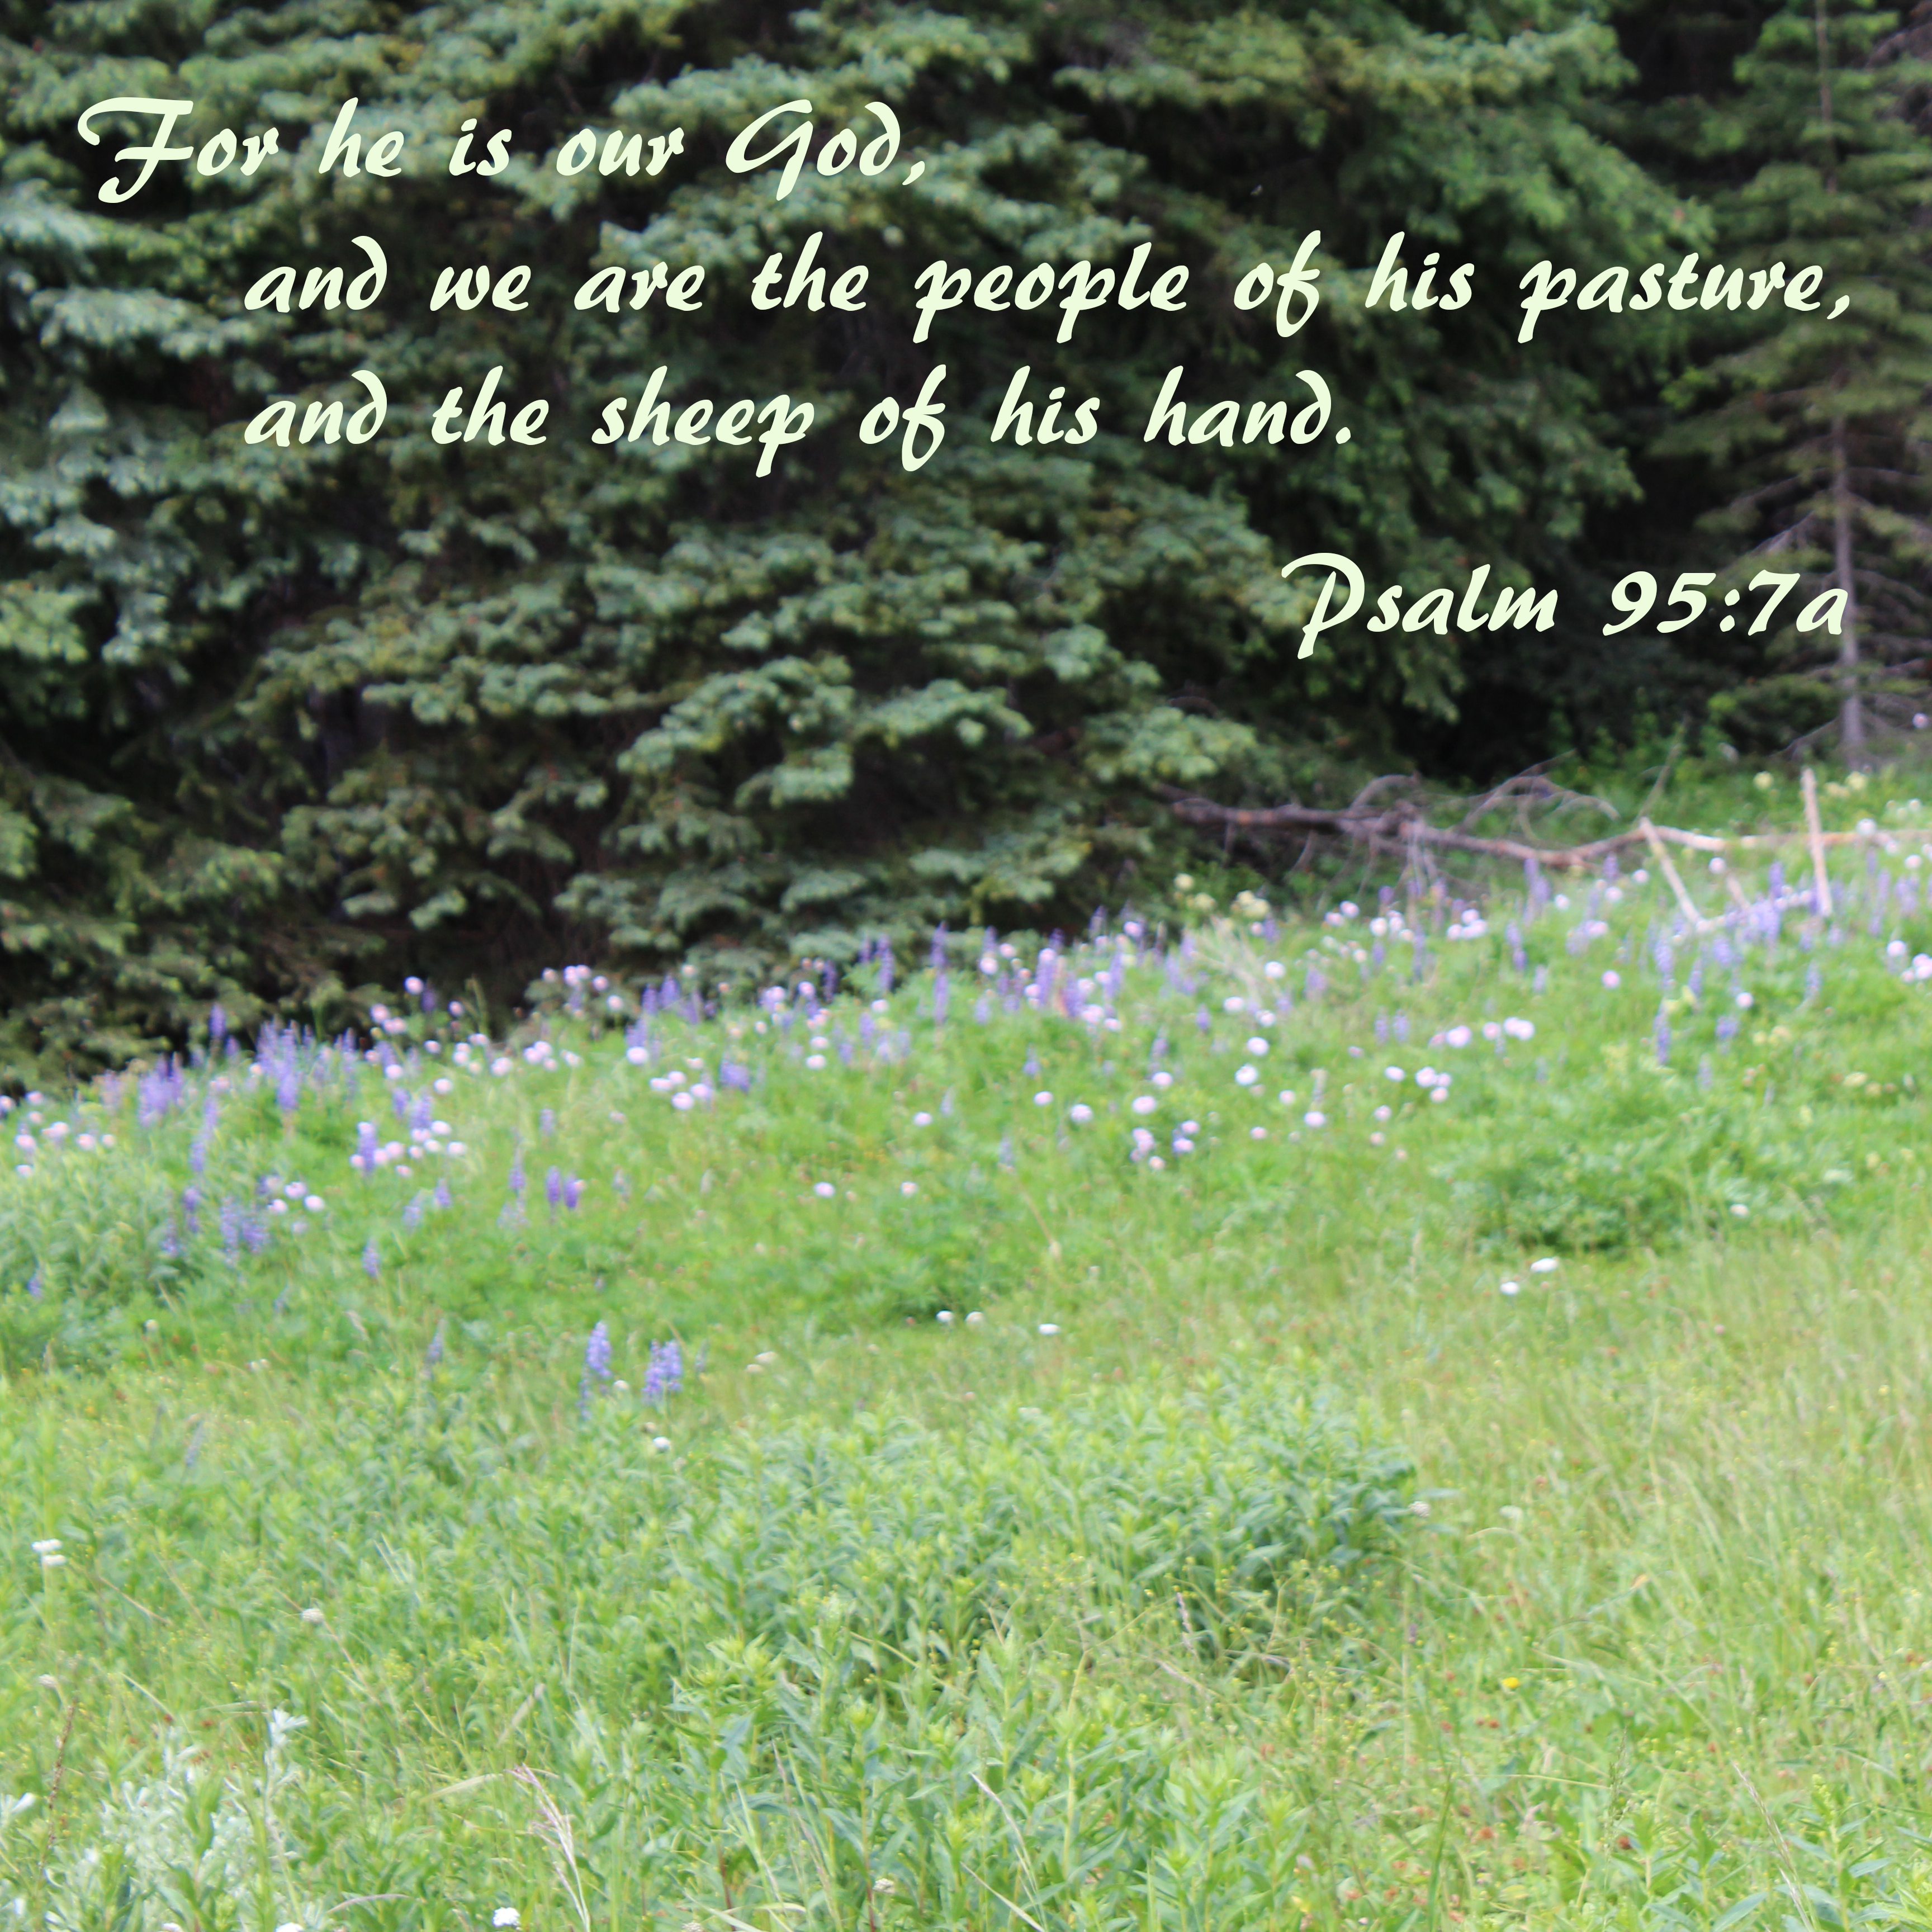 For he is our God,
    and we are the people of his pasture,
    and the sheep of his hand.
Psalm 95:7a